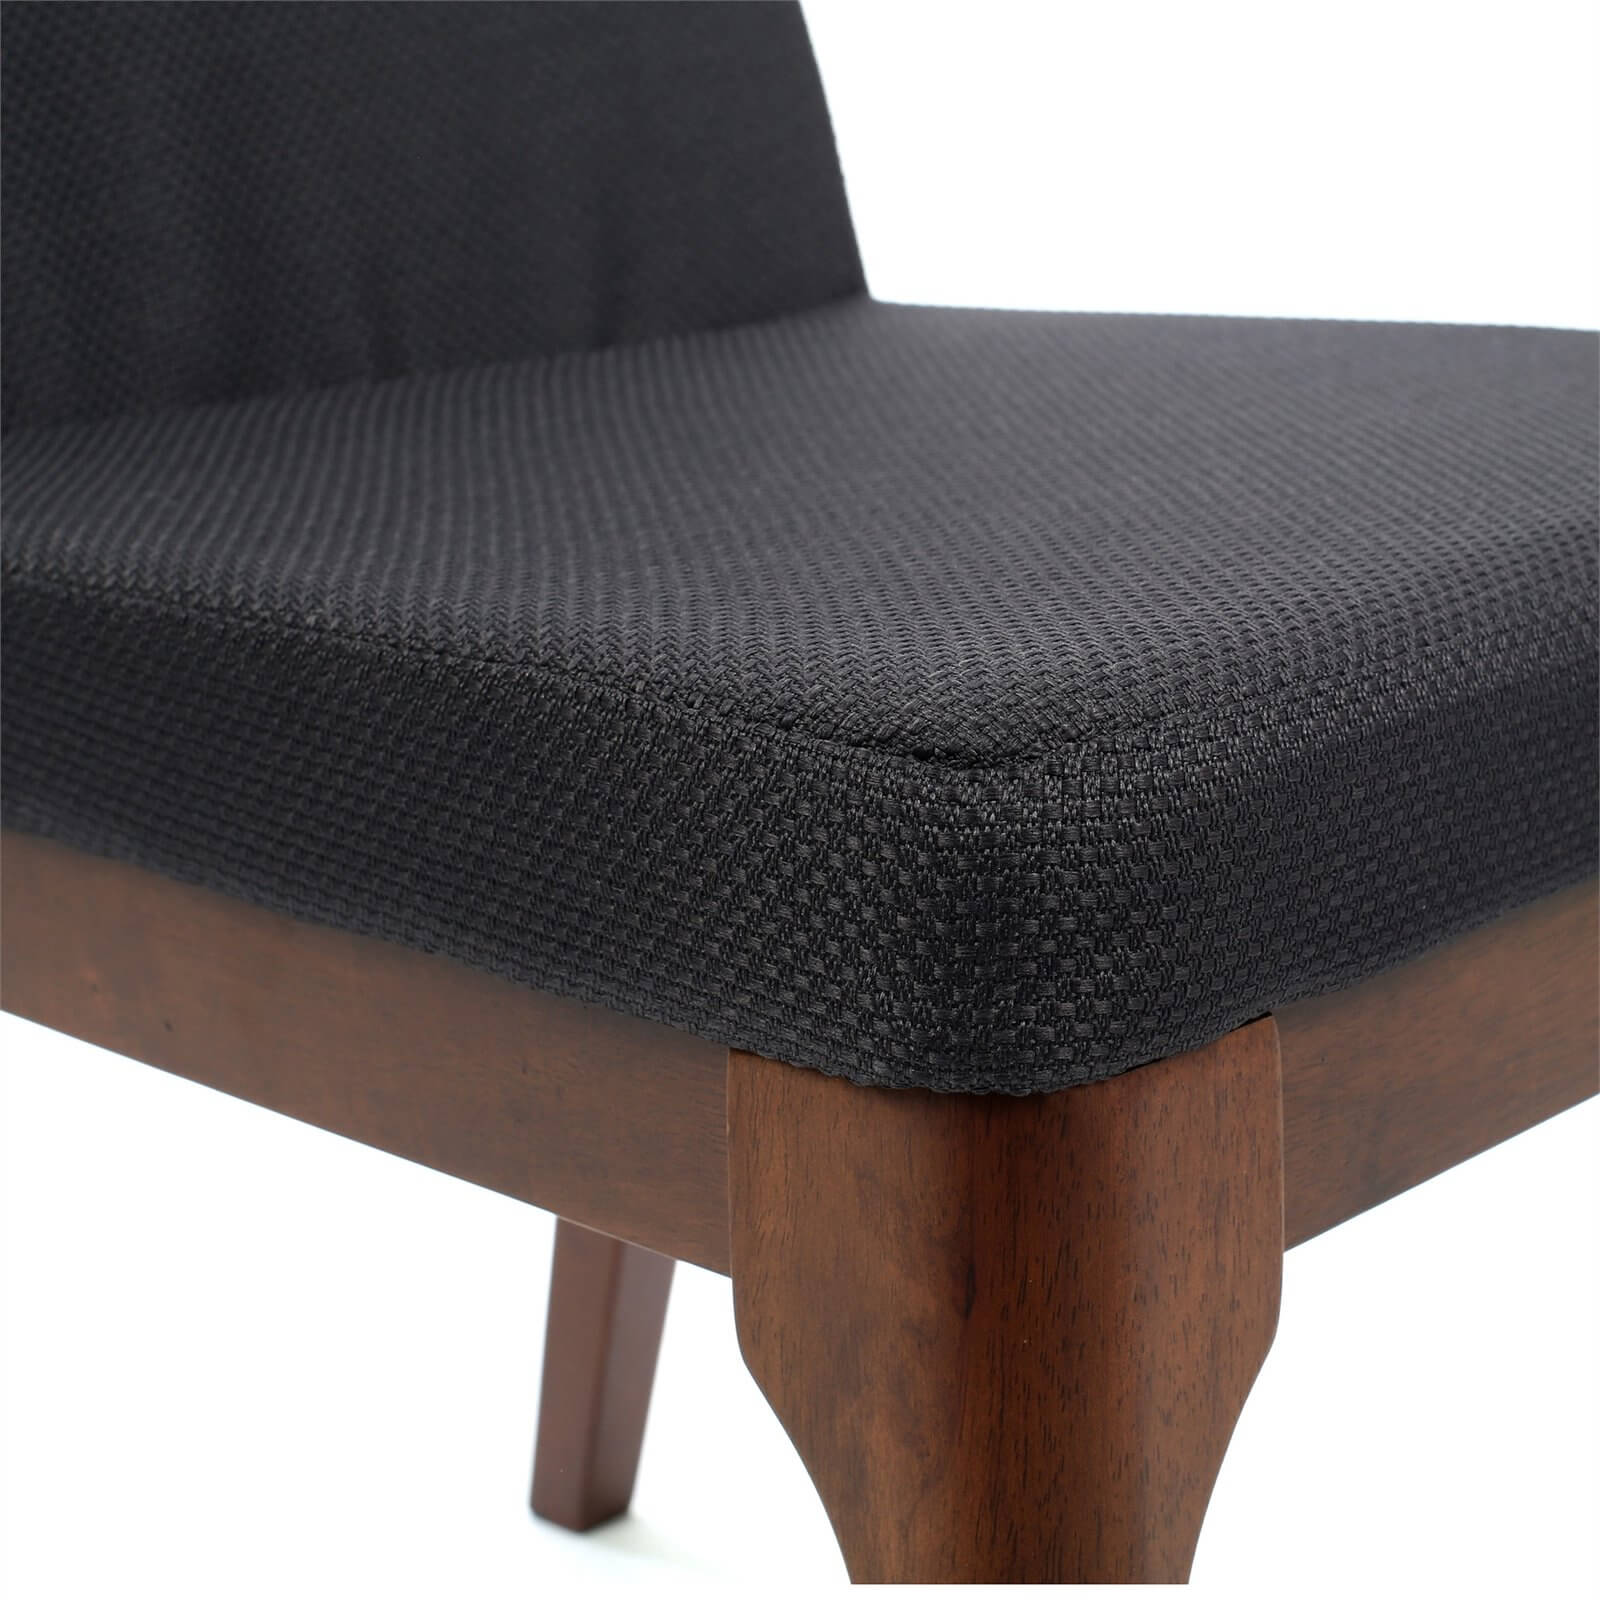 Woven Mesh Dining Chair - Charcoal